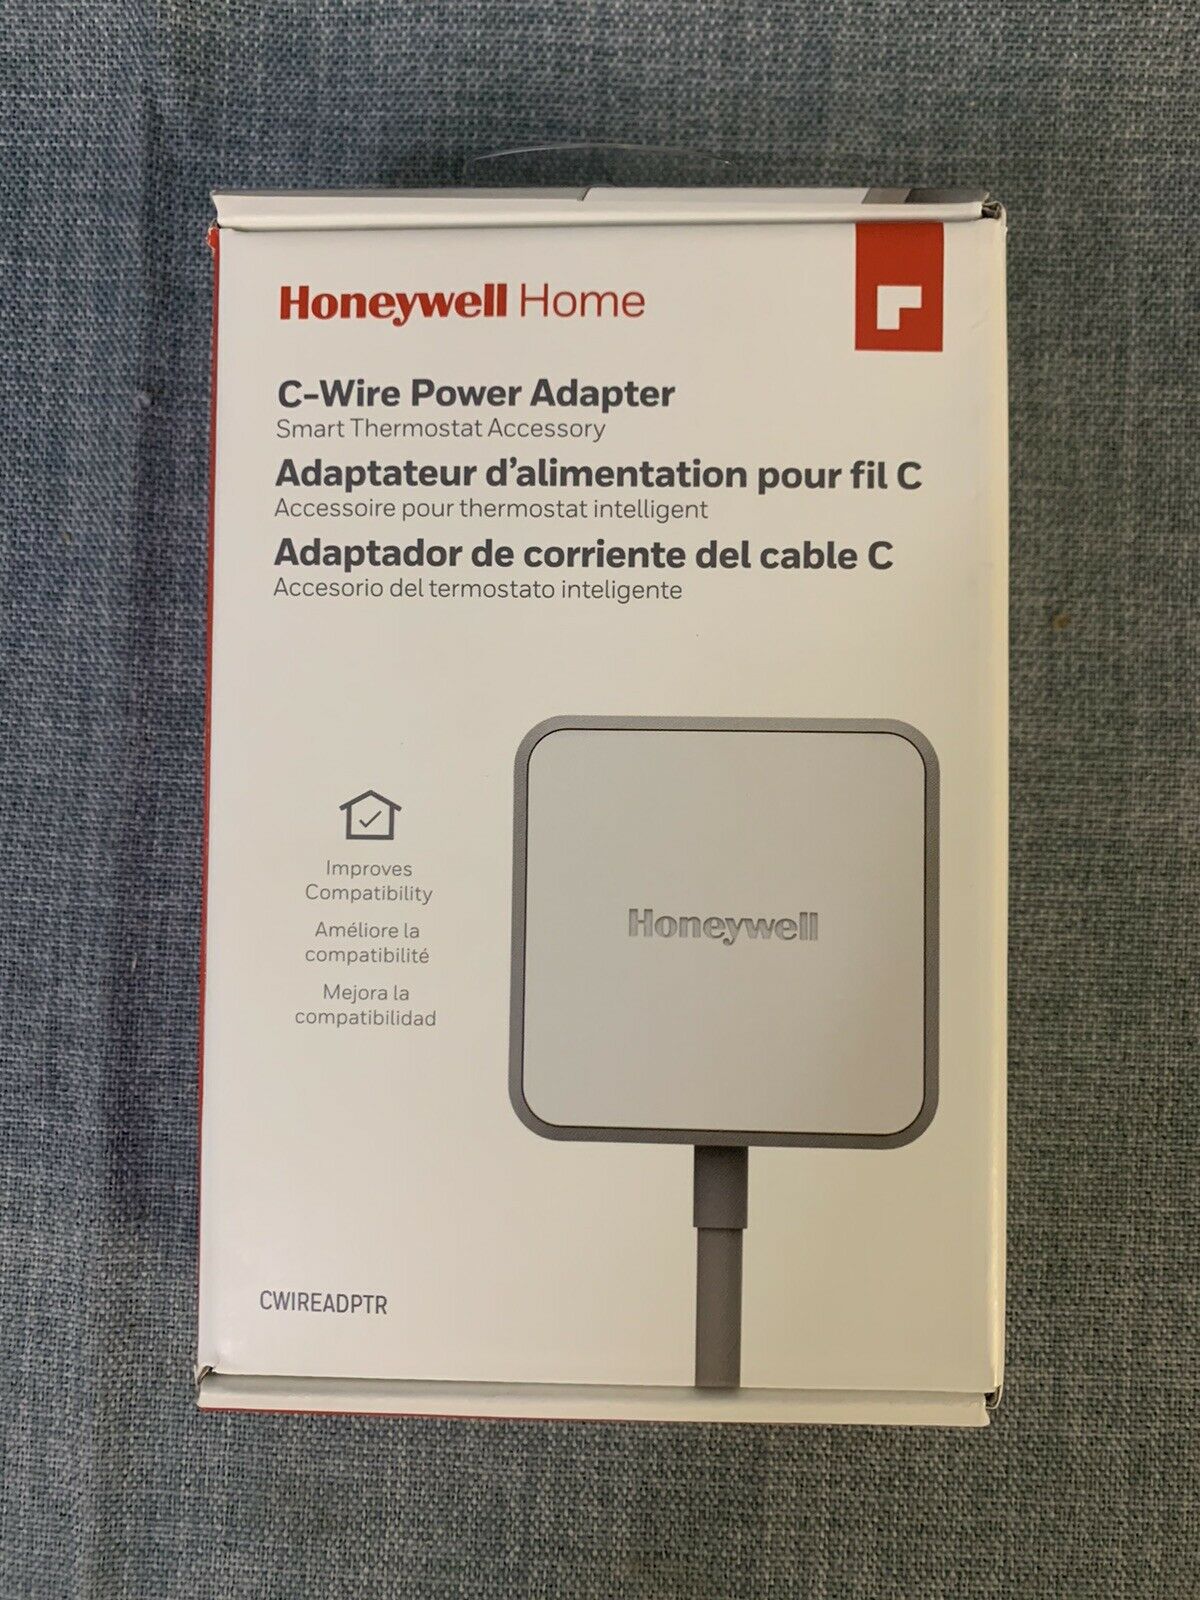 Honeywell Home Cwireadptr C-wire Power Adapter - New